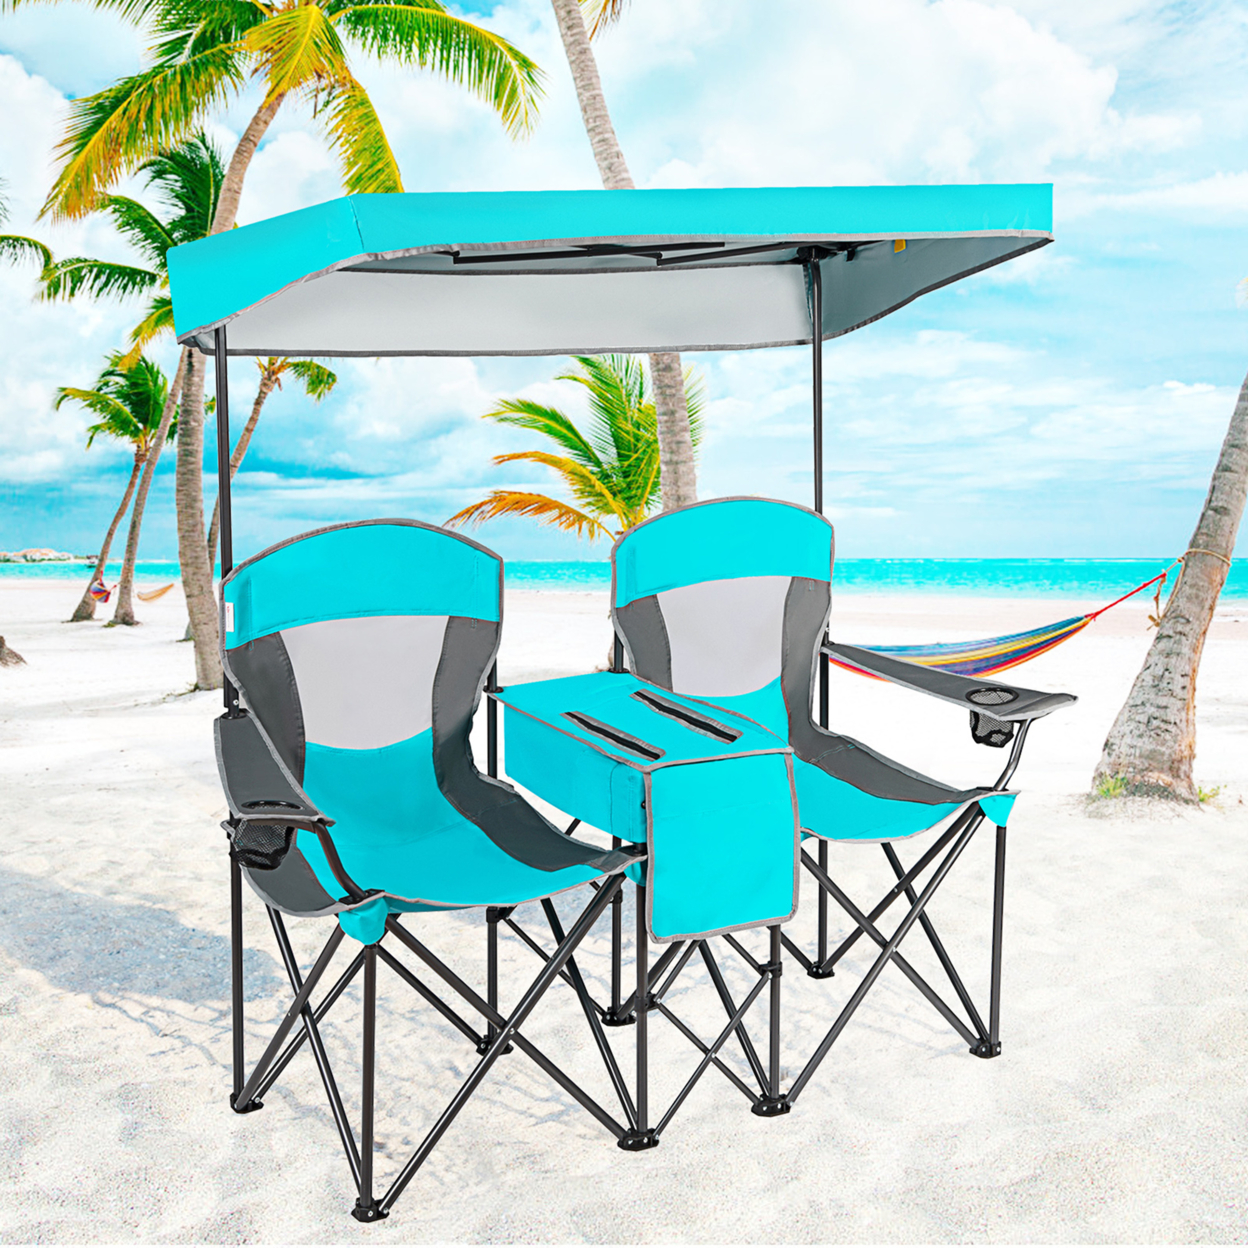 Folding 2-person Camping Chairs Double Sunshade Chairs W/ Canopy Blue/Turquoise/Red - Turquoise